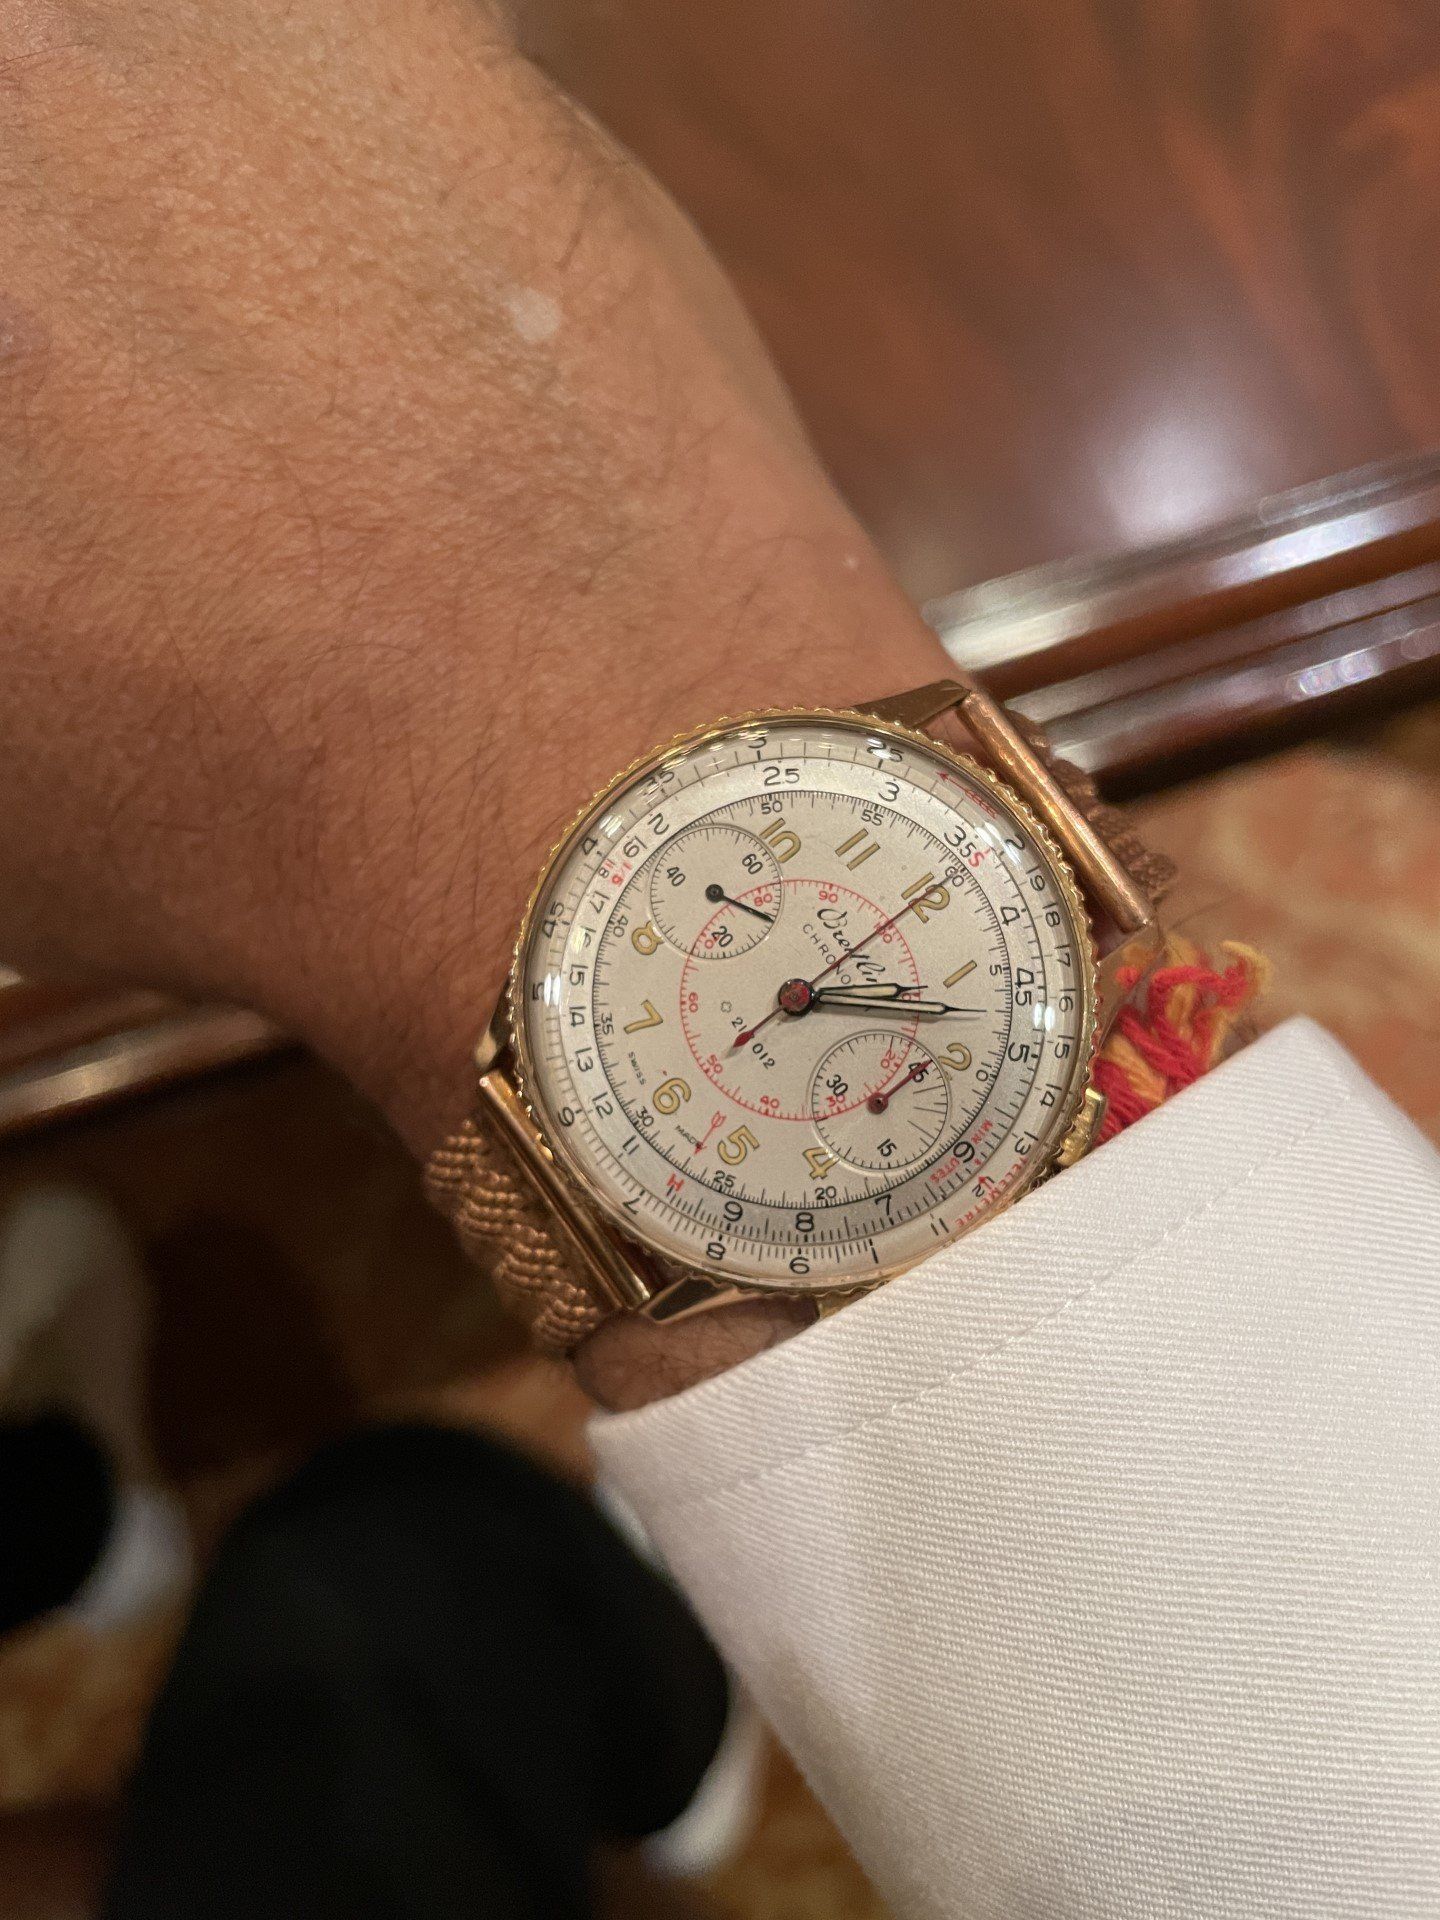 YS’s Breitling Navitimer from the 50’s